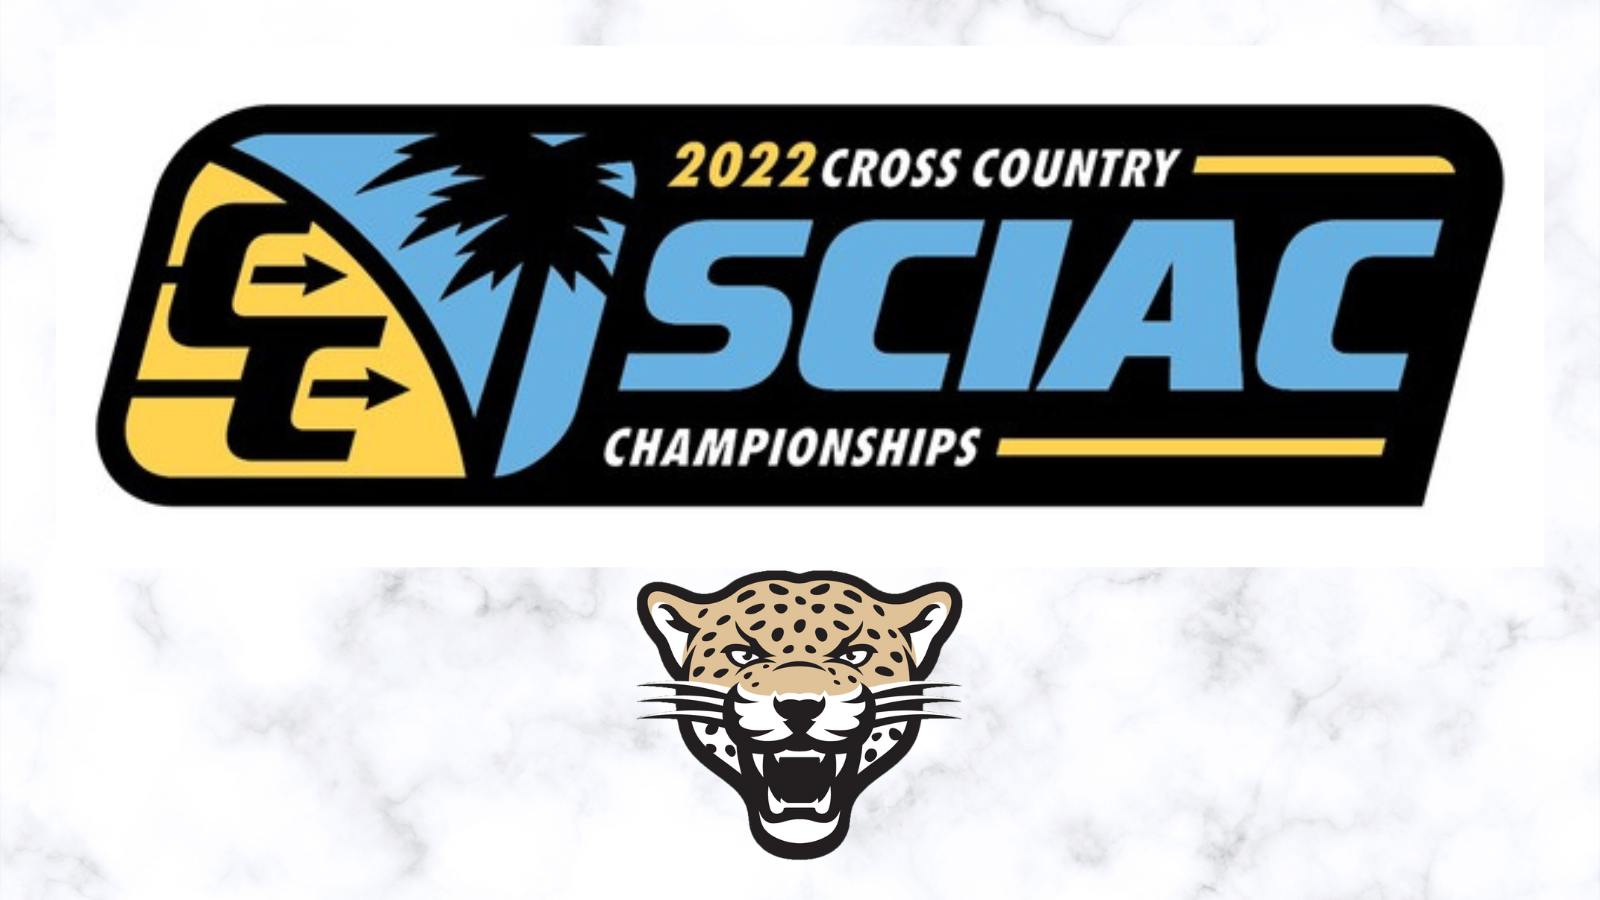 Leopards Cross Country Teams Compete In The 2022 SCIAC Championships